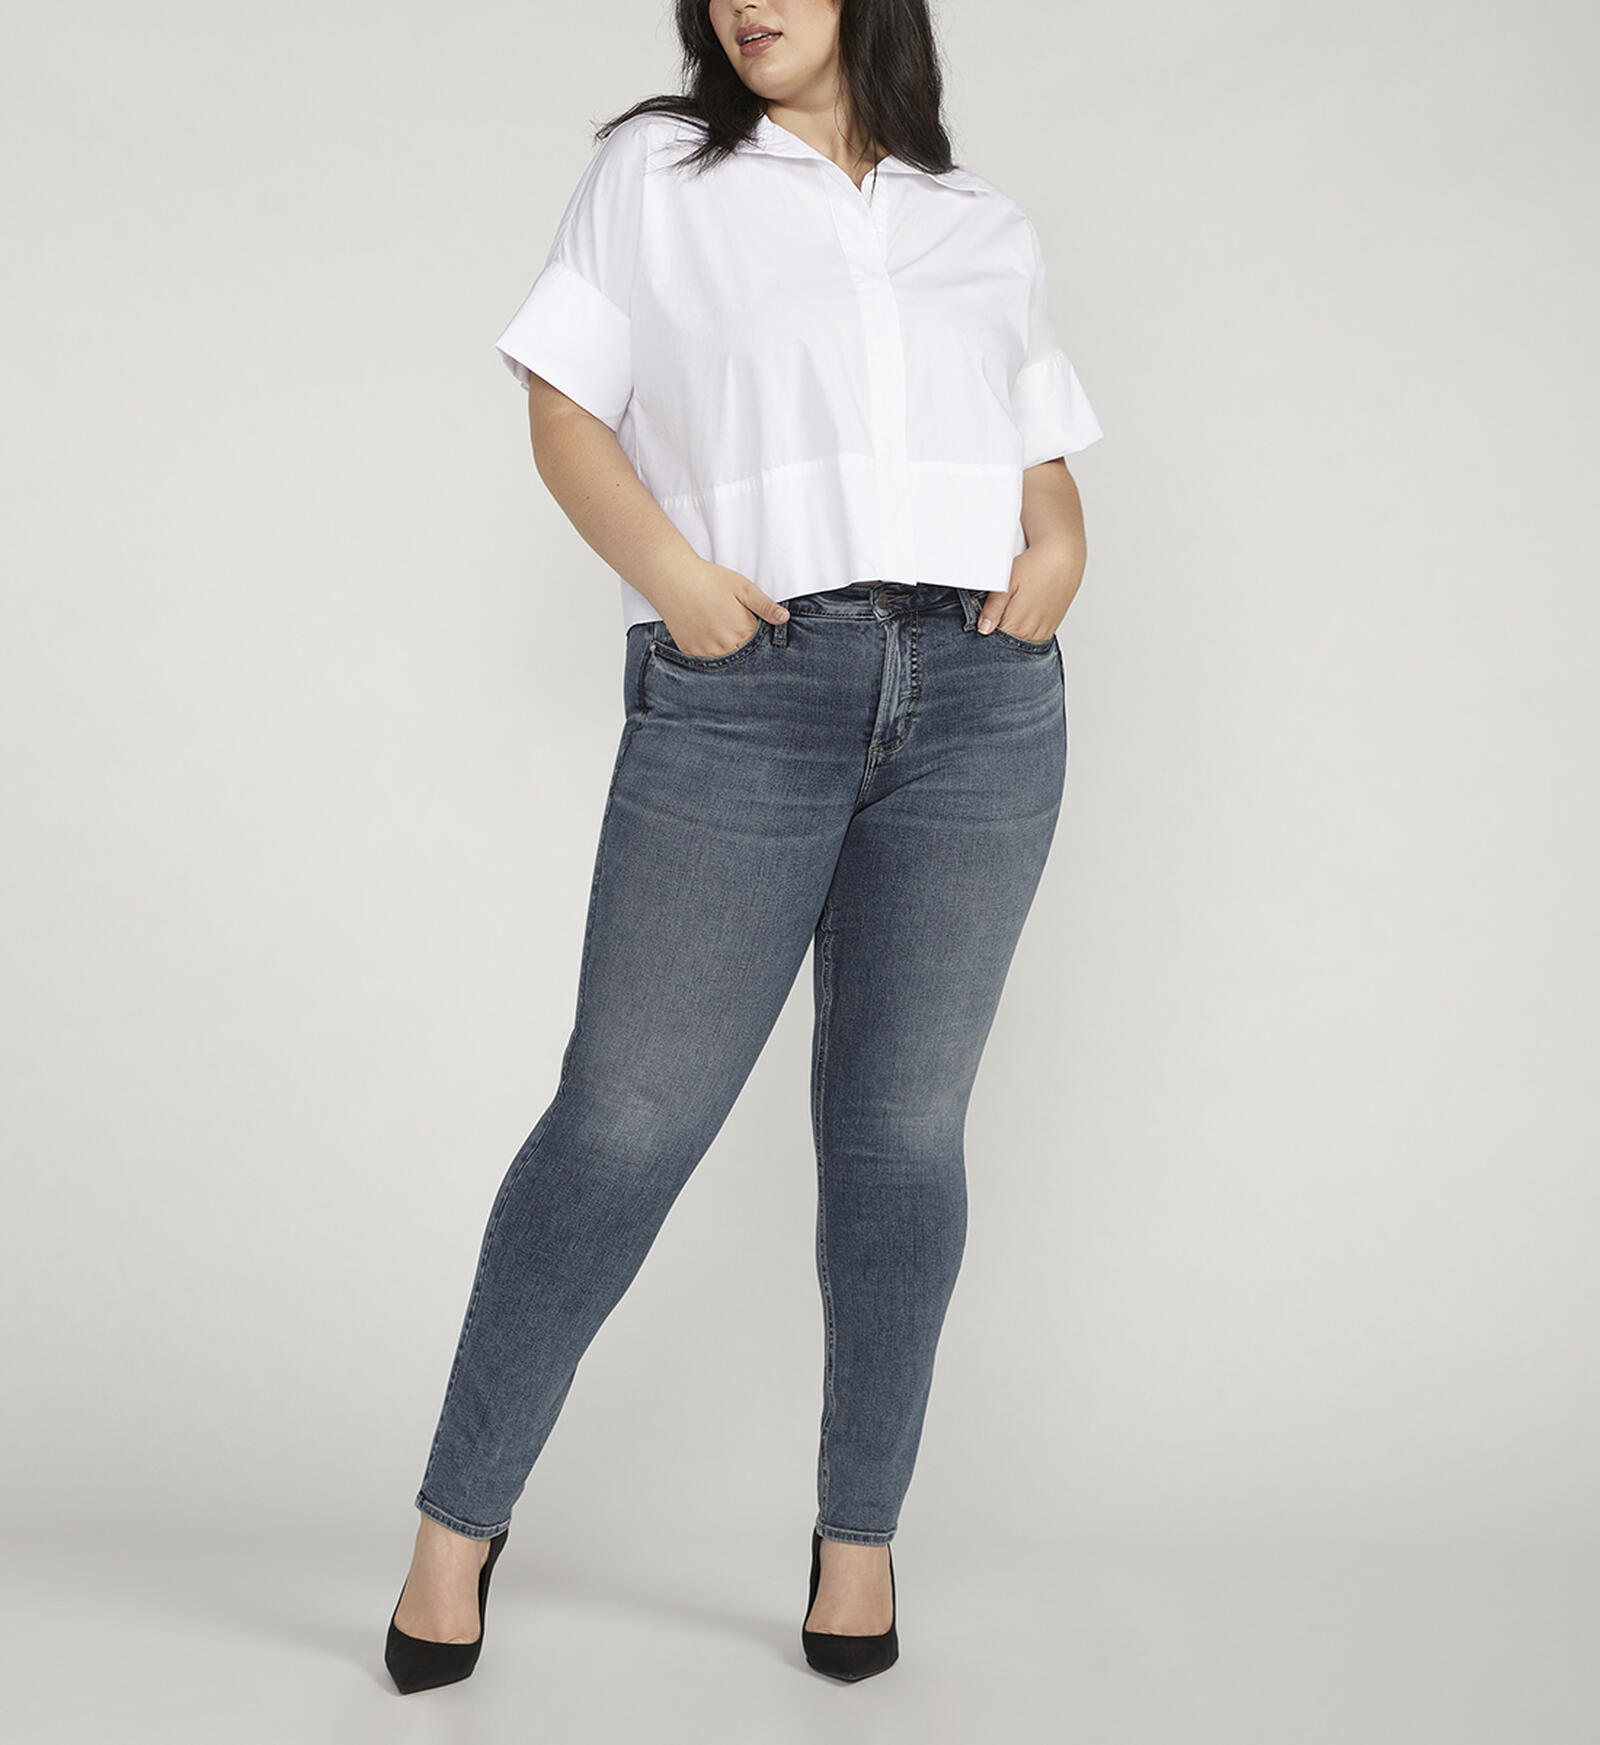 Buy Most Wanted Mid Rise Straight Leg Jeans Plus Size for USD